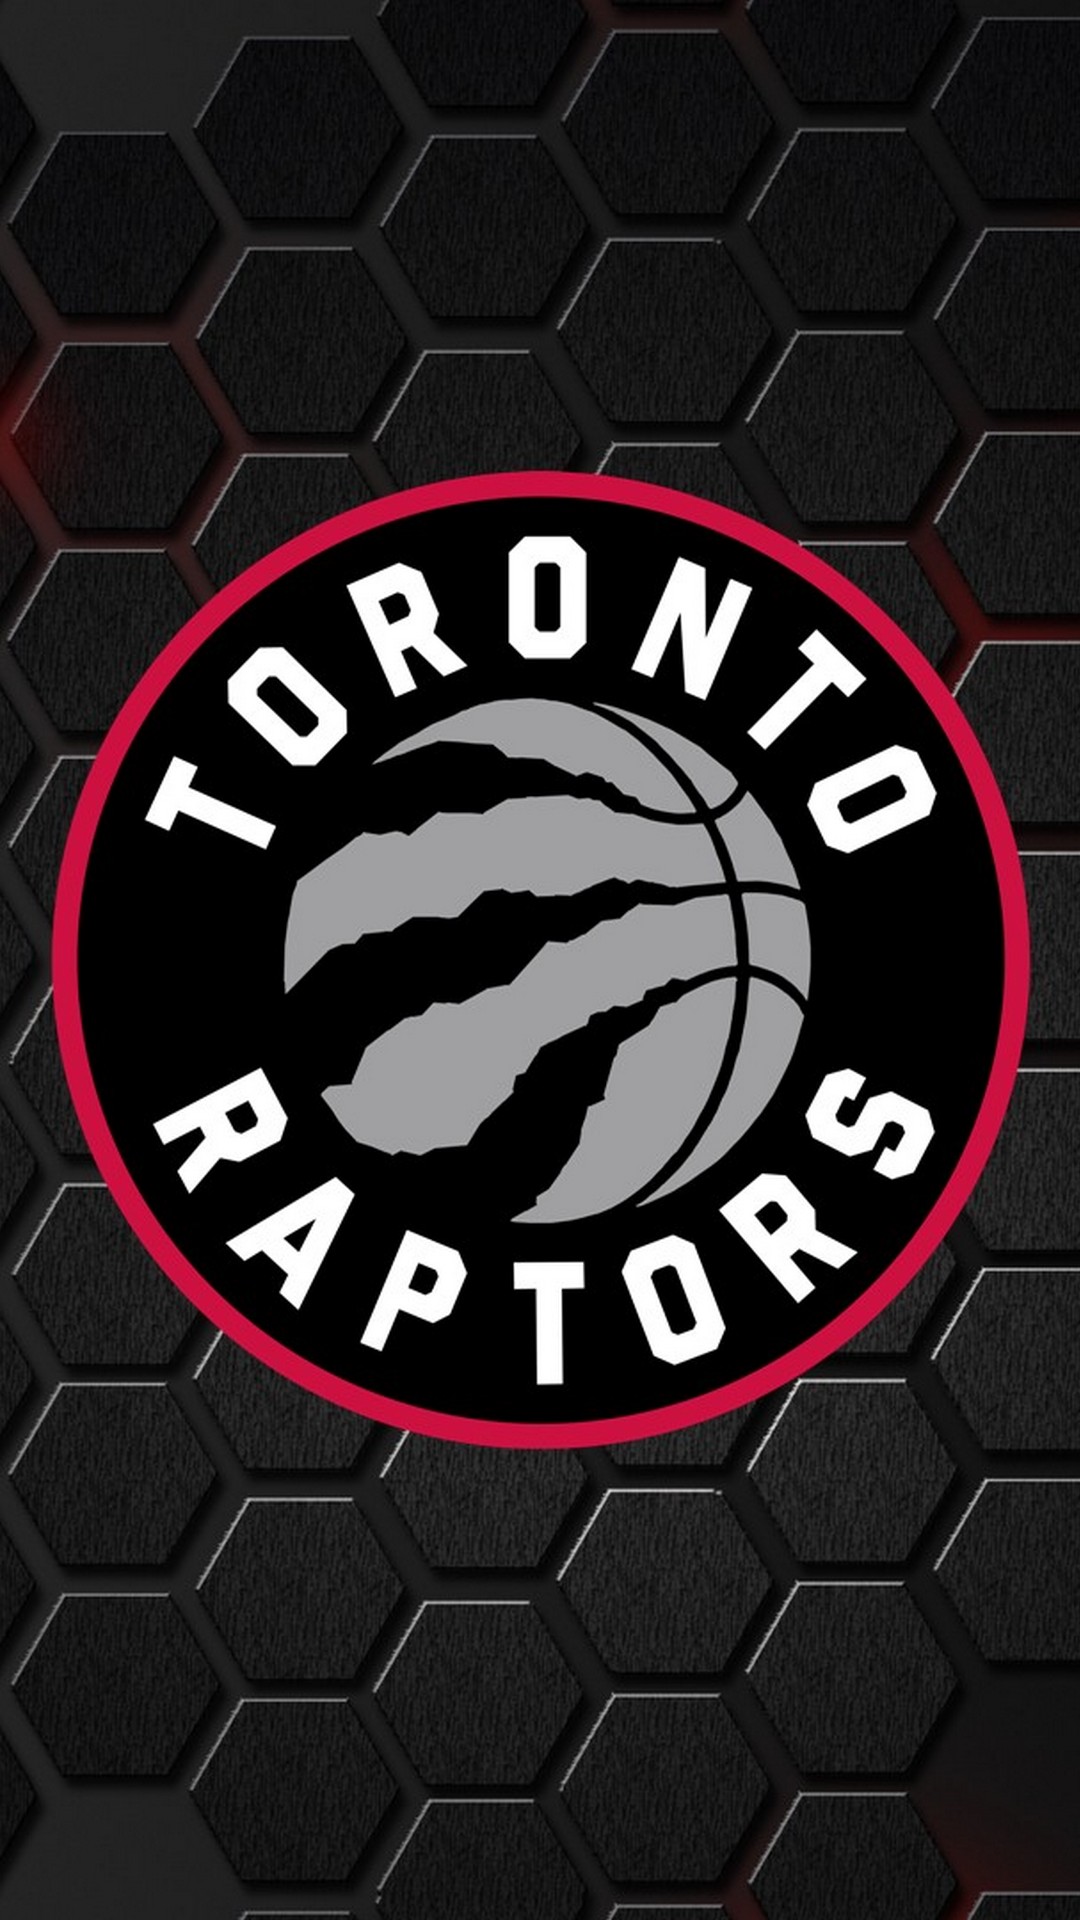 iPhone Wallpaper Toronto Raptors with resolution 1080X1920 pixel. You can make this wallpaper for your iPhone 5, 6, 7, 8, X backgrounds, Mobile Screensaver, or iPad Lock Screen